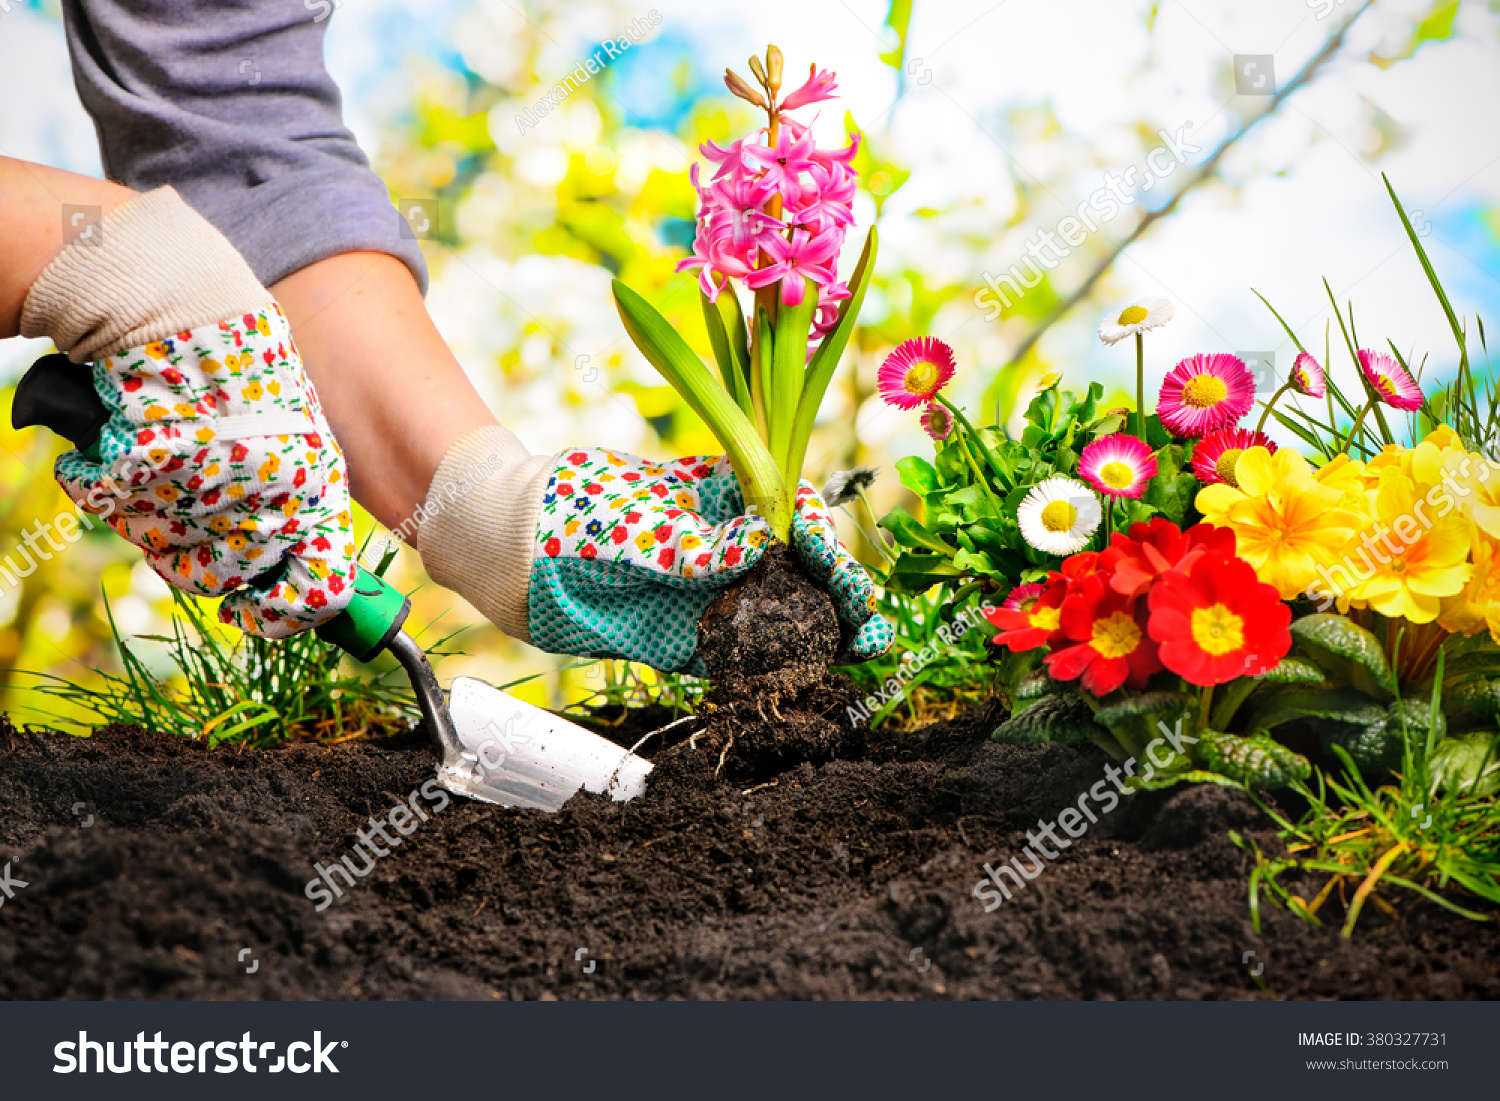 Gardeners hands planting flowers at back yard #380327731